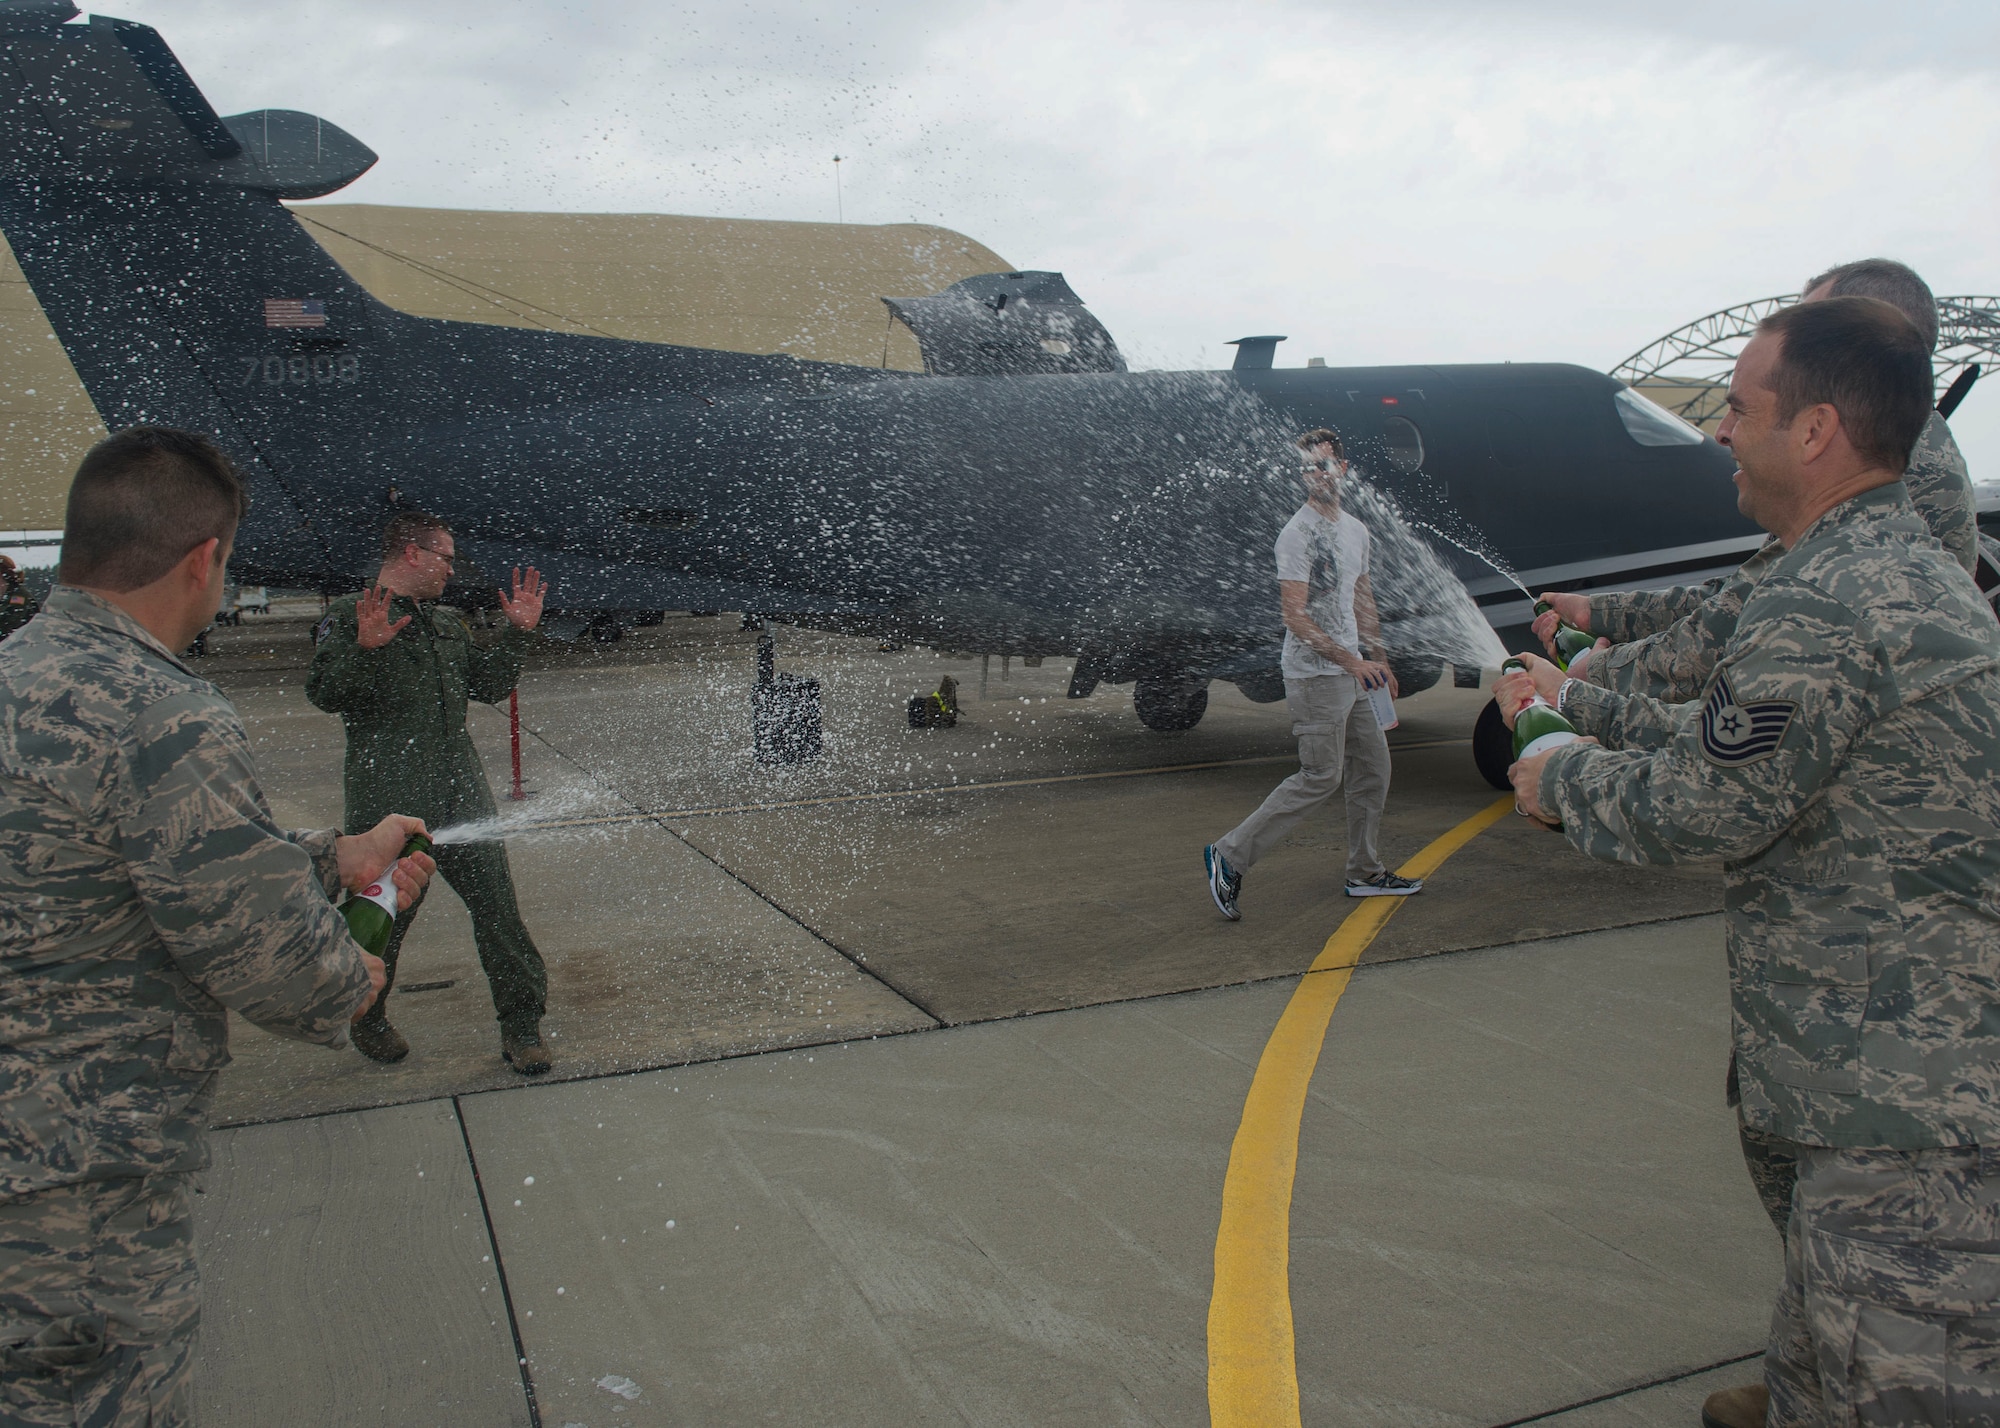 Staff Sgt. Kyle Cook, a tactical system operator with the 28th Intelligence Squadron, gets doused after completing his aircraft mission qualification training March 31 at Hurlburt Field, Fla.  The completion of that training pushed the squadron to its goal of full operational capability more than a year ahead of schedule.  (U.S. Air Force photo/Airman 1st Class Kai White)